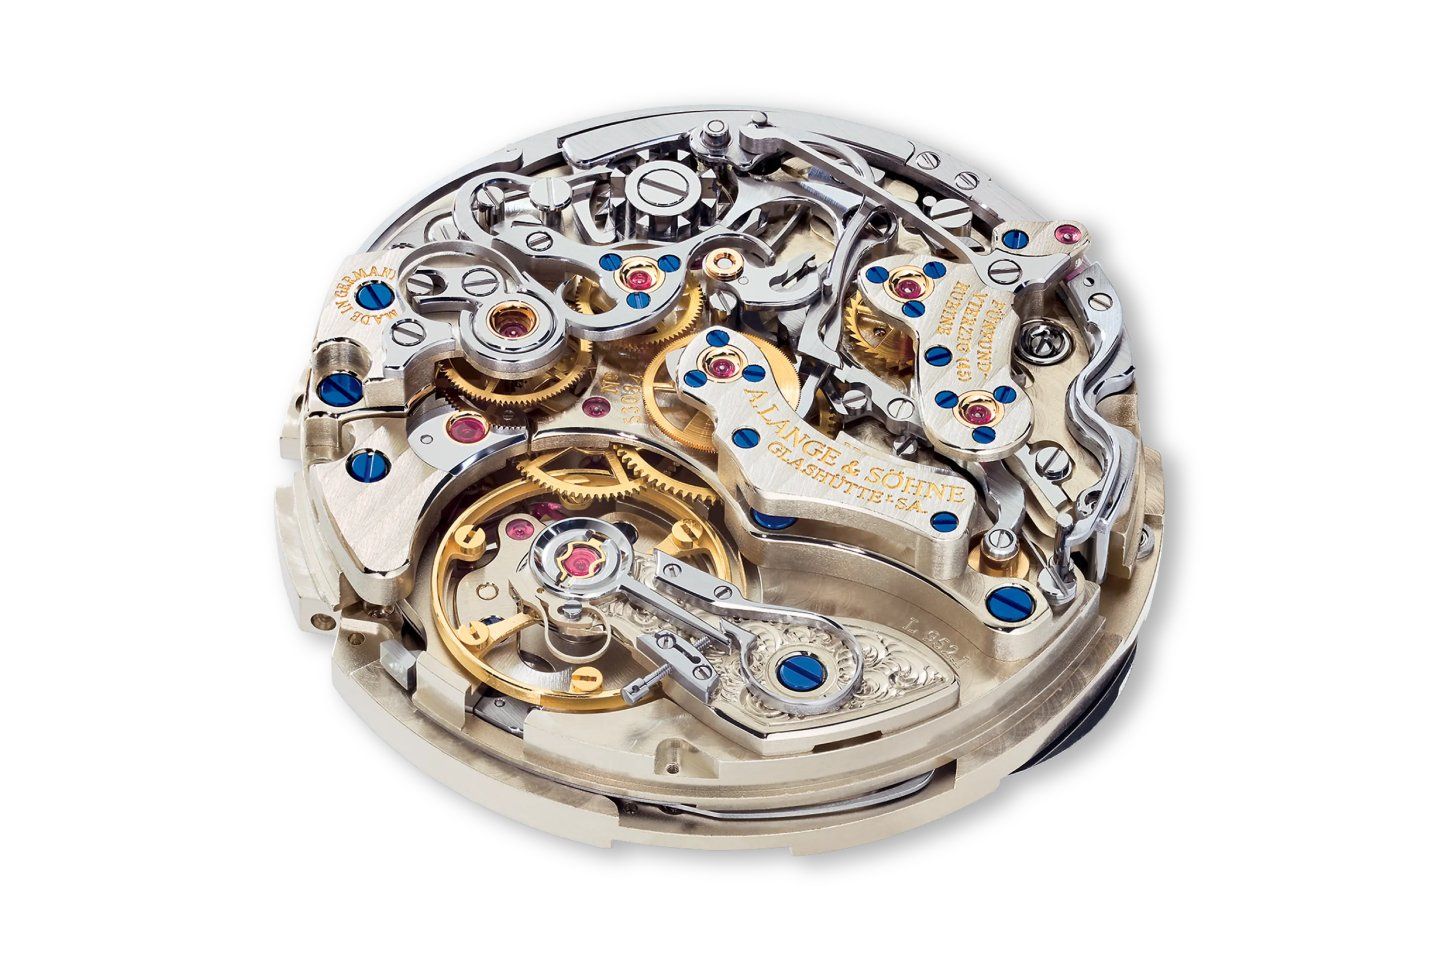 The caliber L.952.1 comprises 556 parts, of which 223 components are devoted to the calendar mechanism